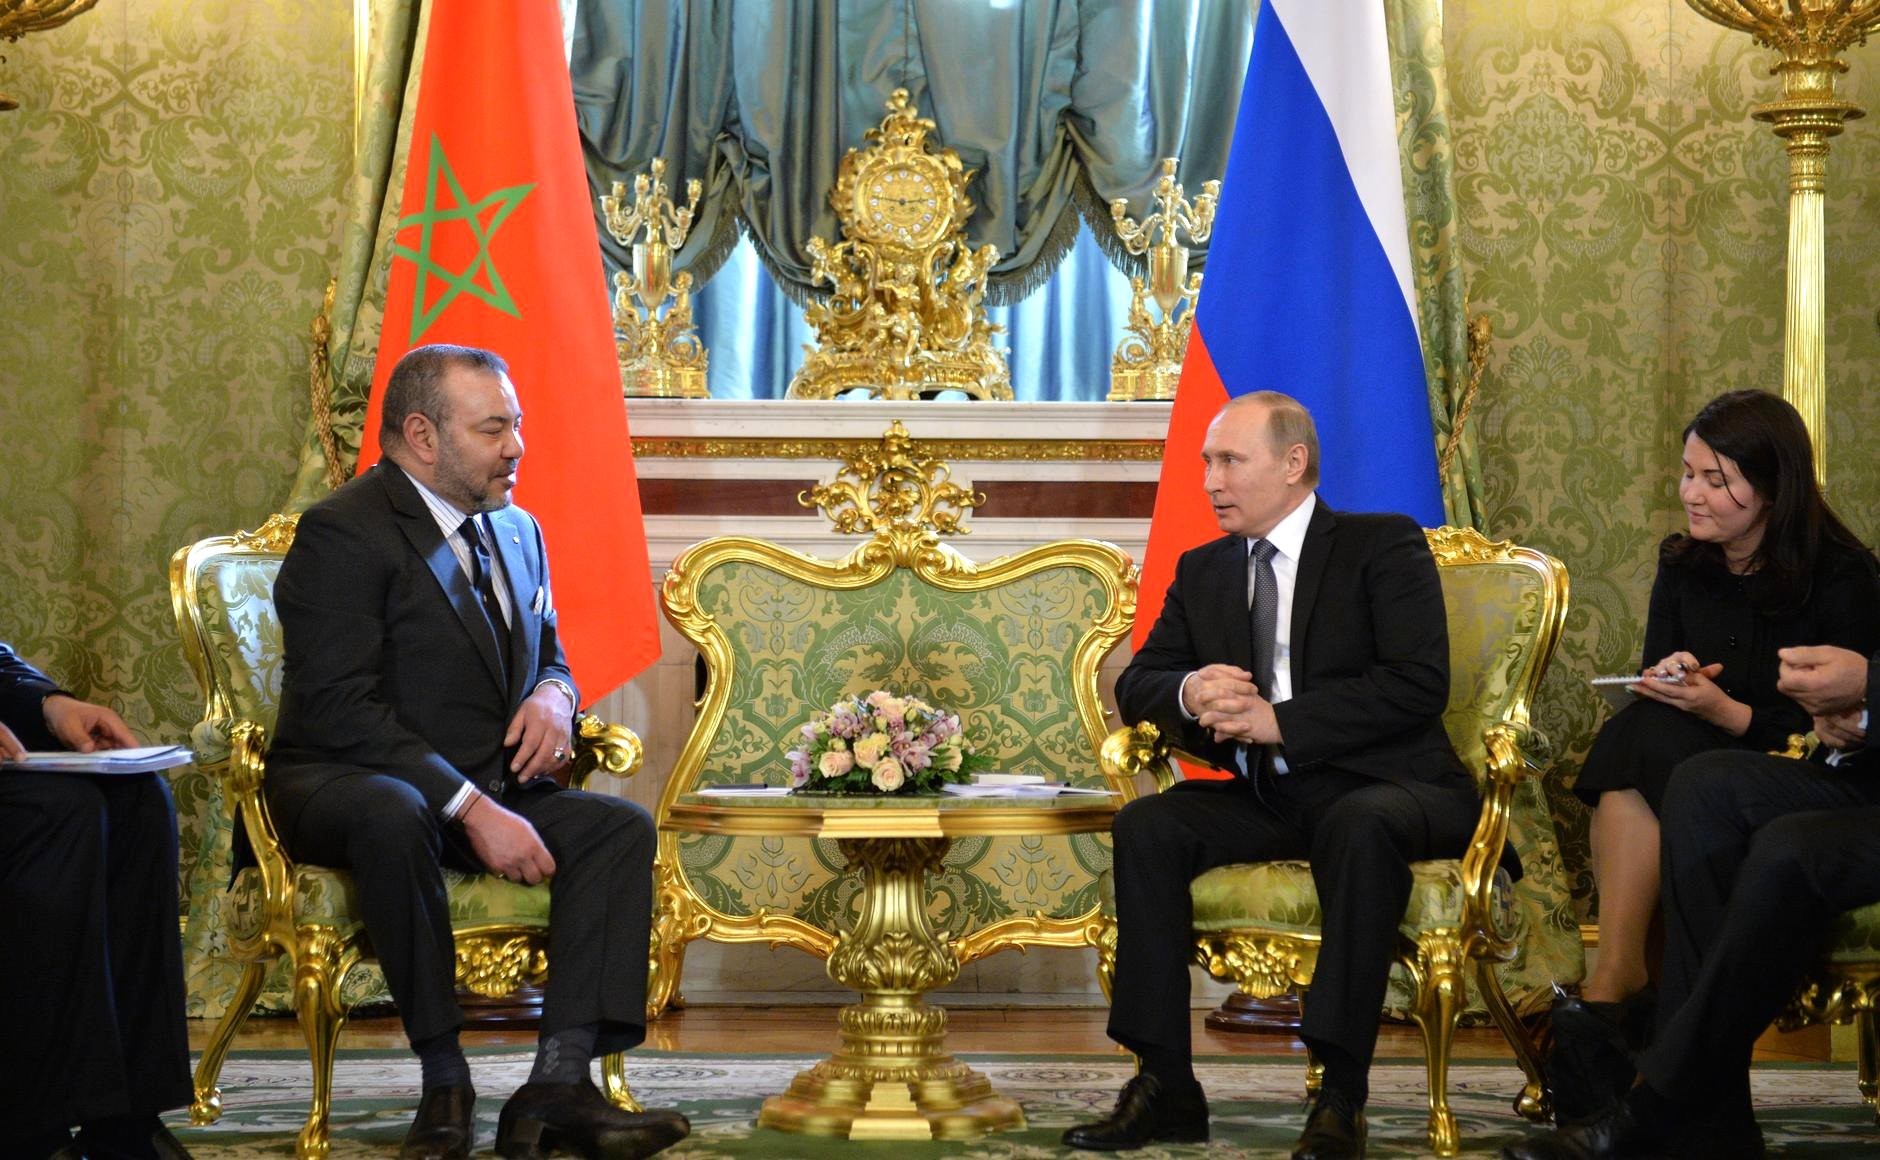 meeting-with-king-mohammed-vi-of-morocco-president-of-russia